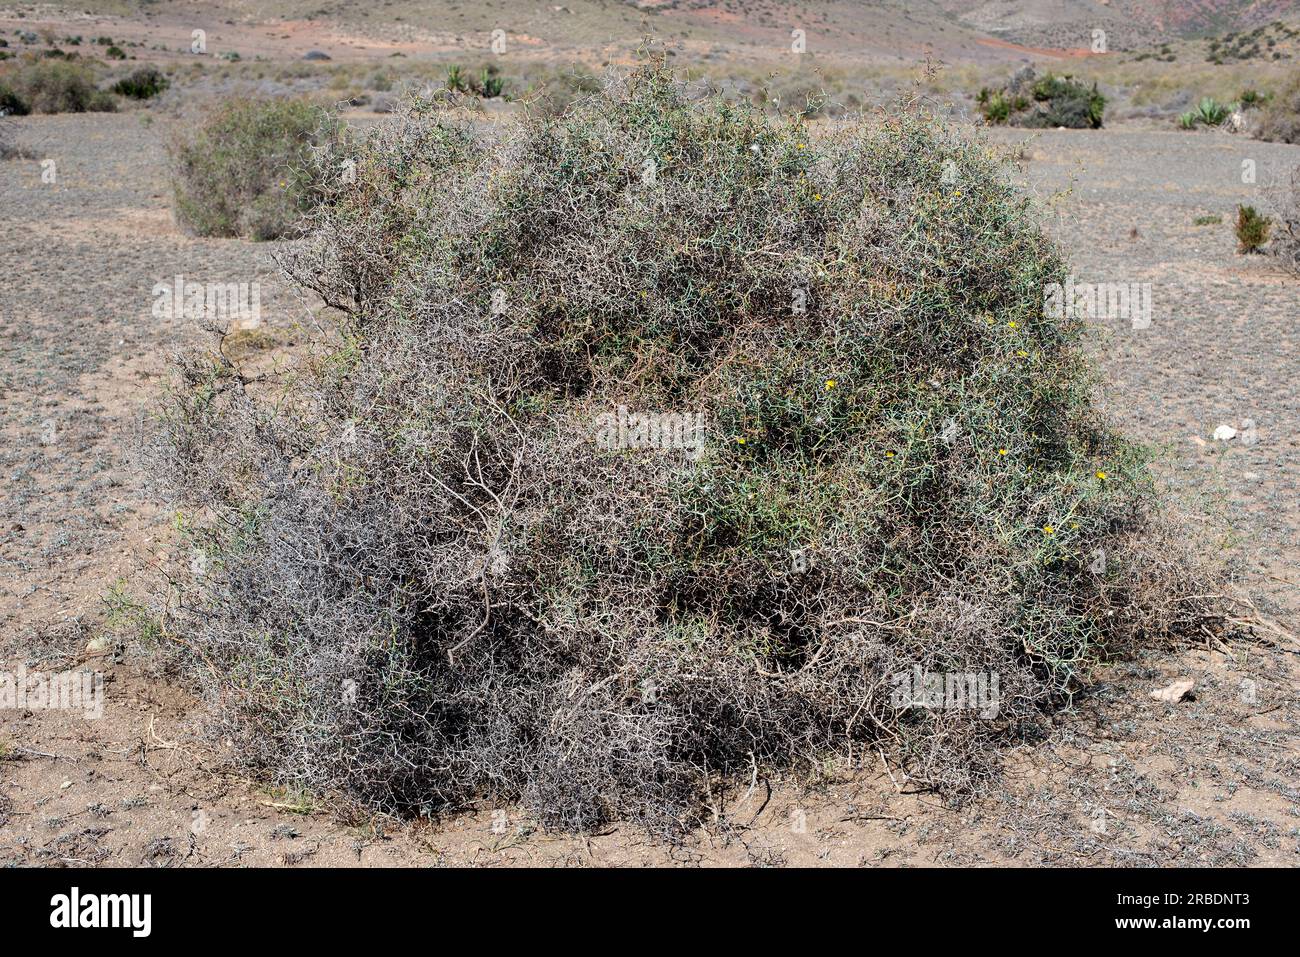 Launaea arborescens is a spiny shrub native to Canary Islands, southeastern Spain and western Africa. Angiosperms. Asteraceae. This photo was taken in Stock Photo